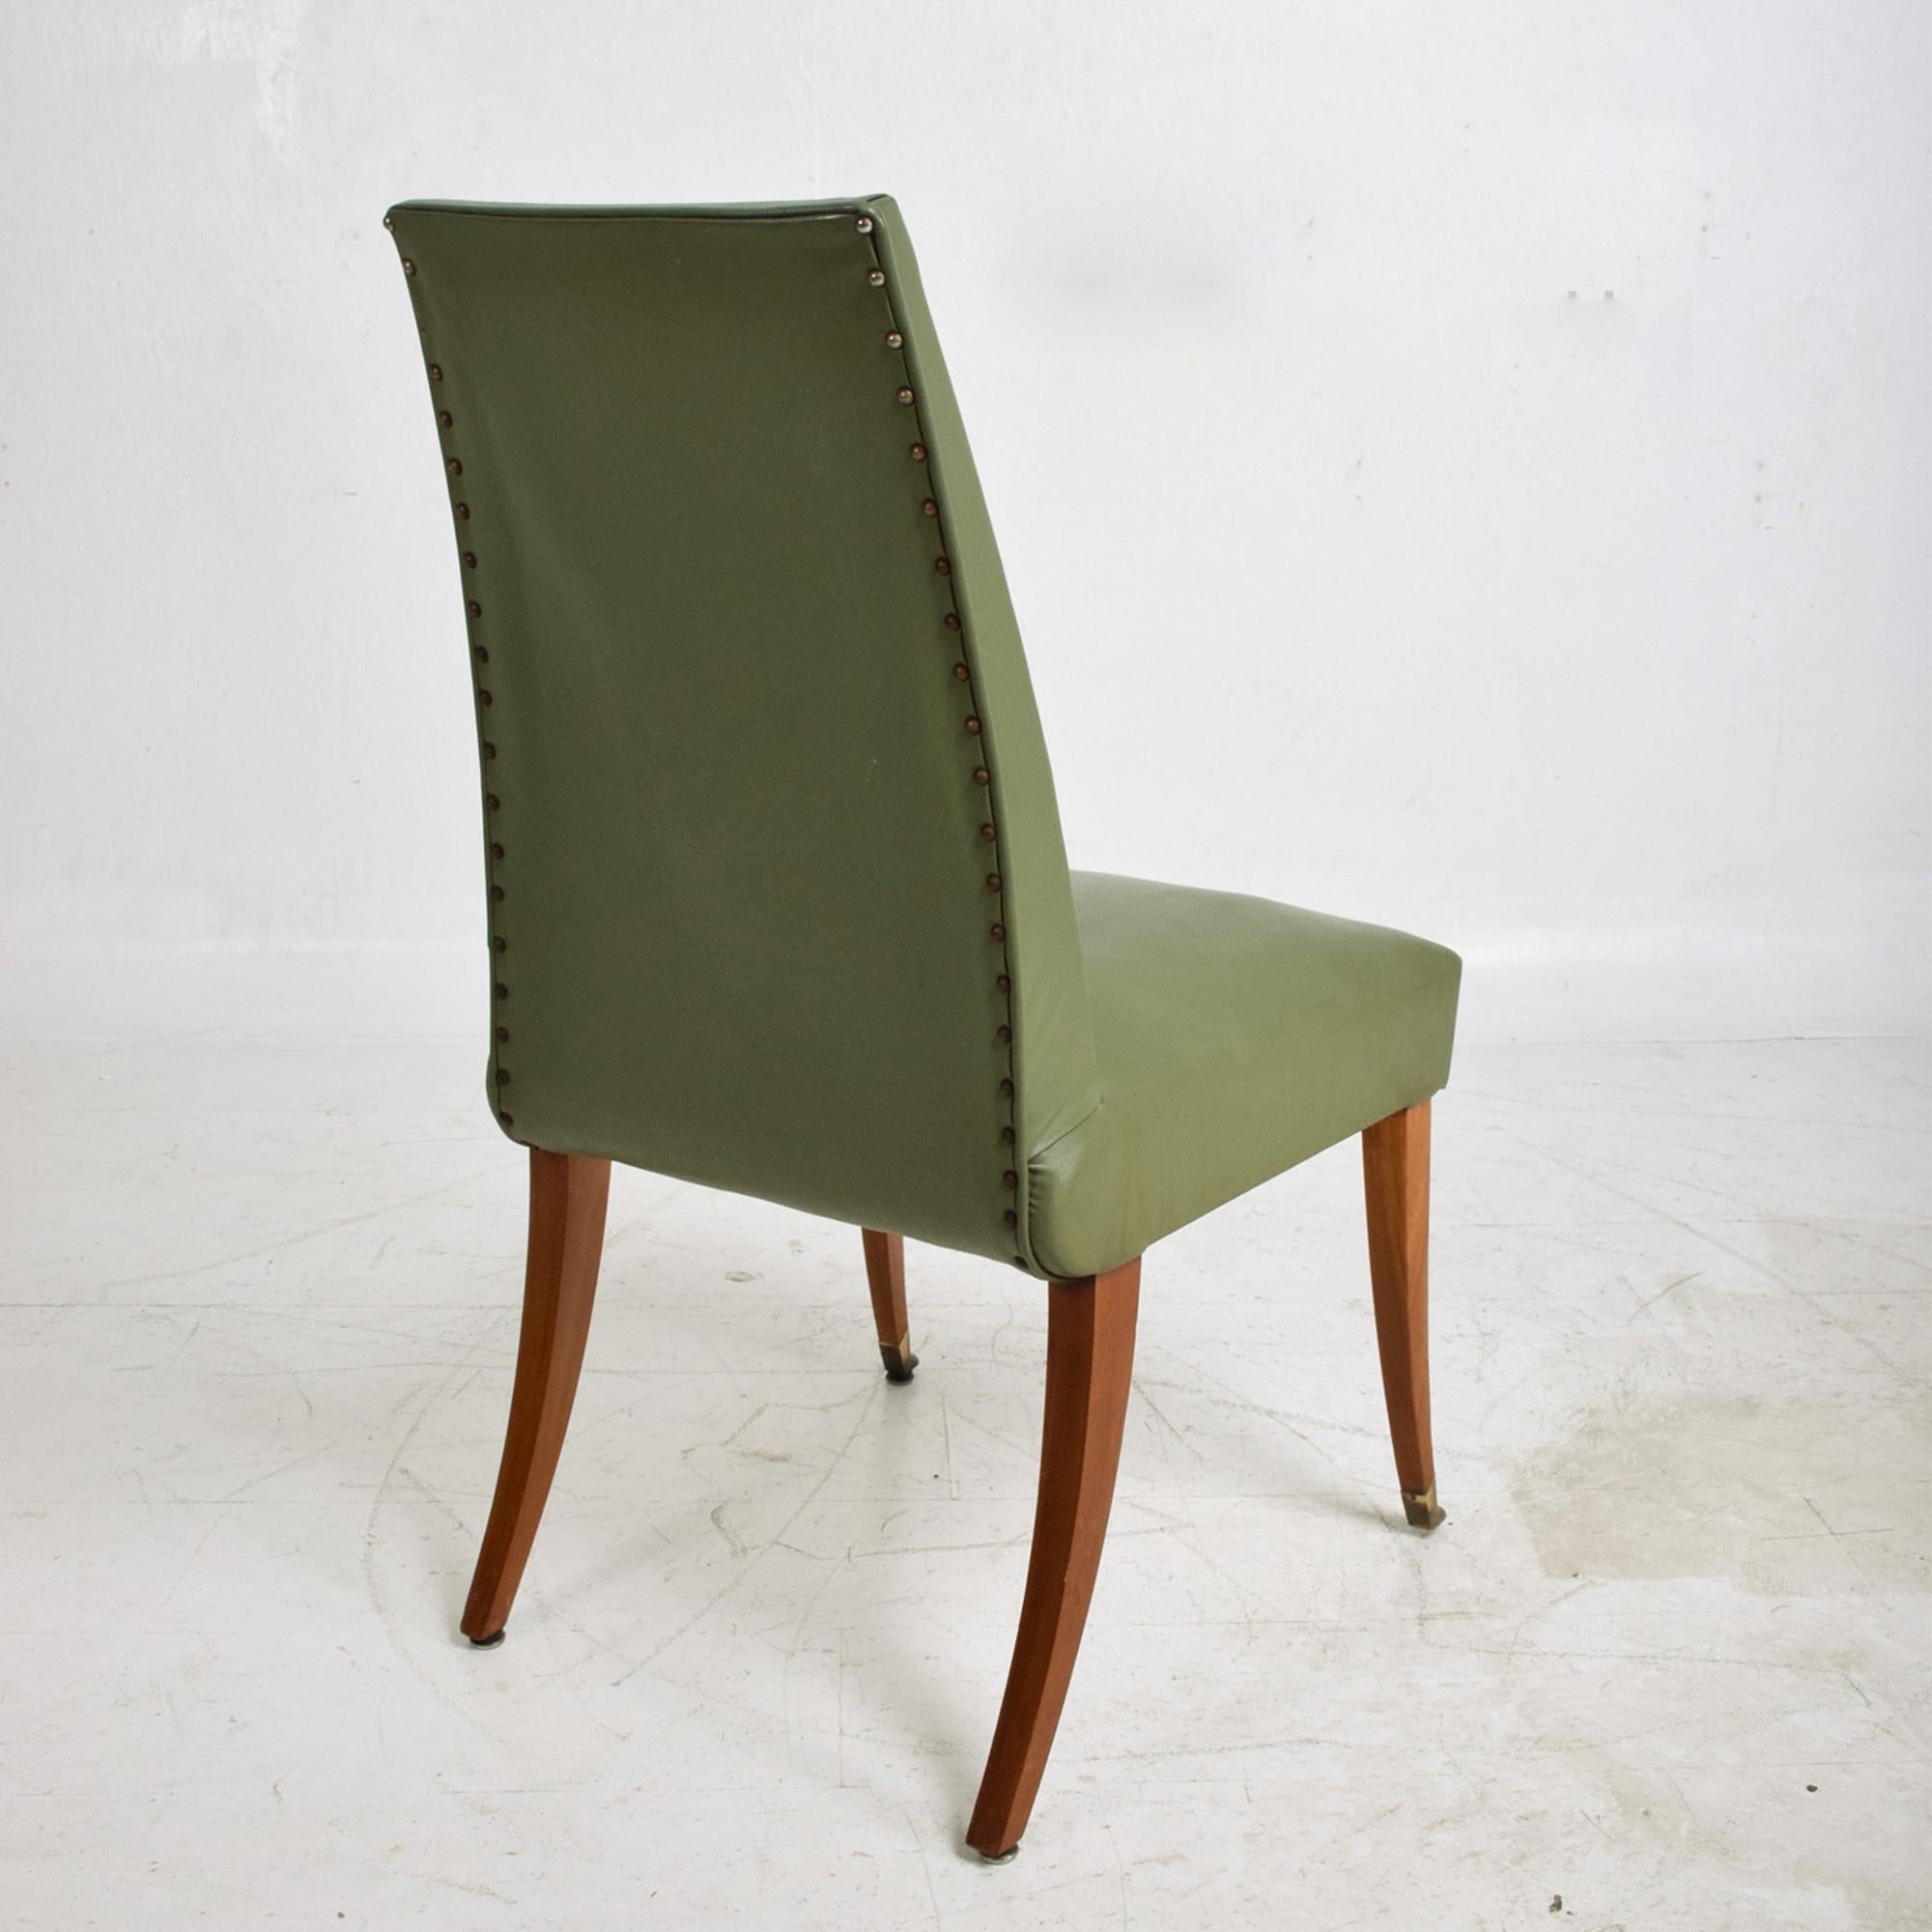 Sophisticated Arturo Pani Dining Chairs Set of 8 in Faux Green Leather
flared mahogany wood with solid brass leg tips
Unmarked attributed to Arturo Pani 1950s
37.38 tall x 25 D x 19.5 W, Seat 18 tall
Original vintage preowned condition. 
New